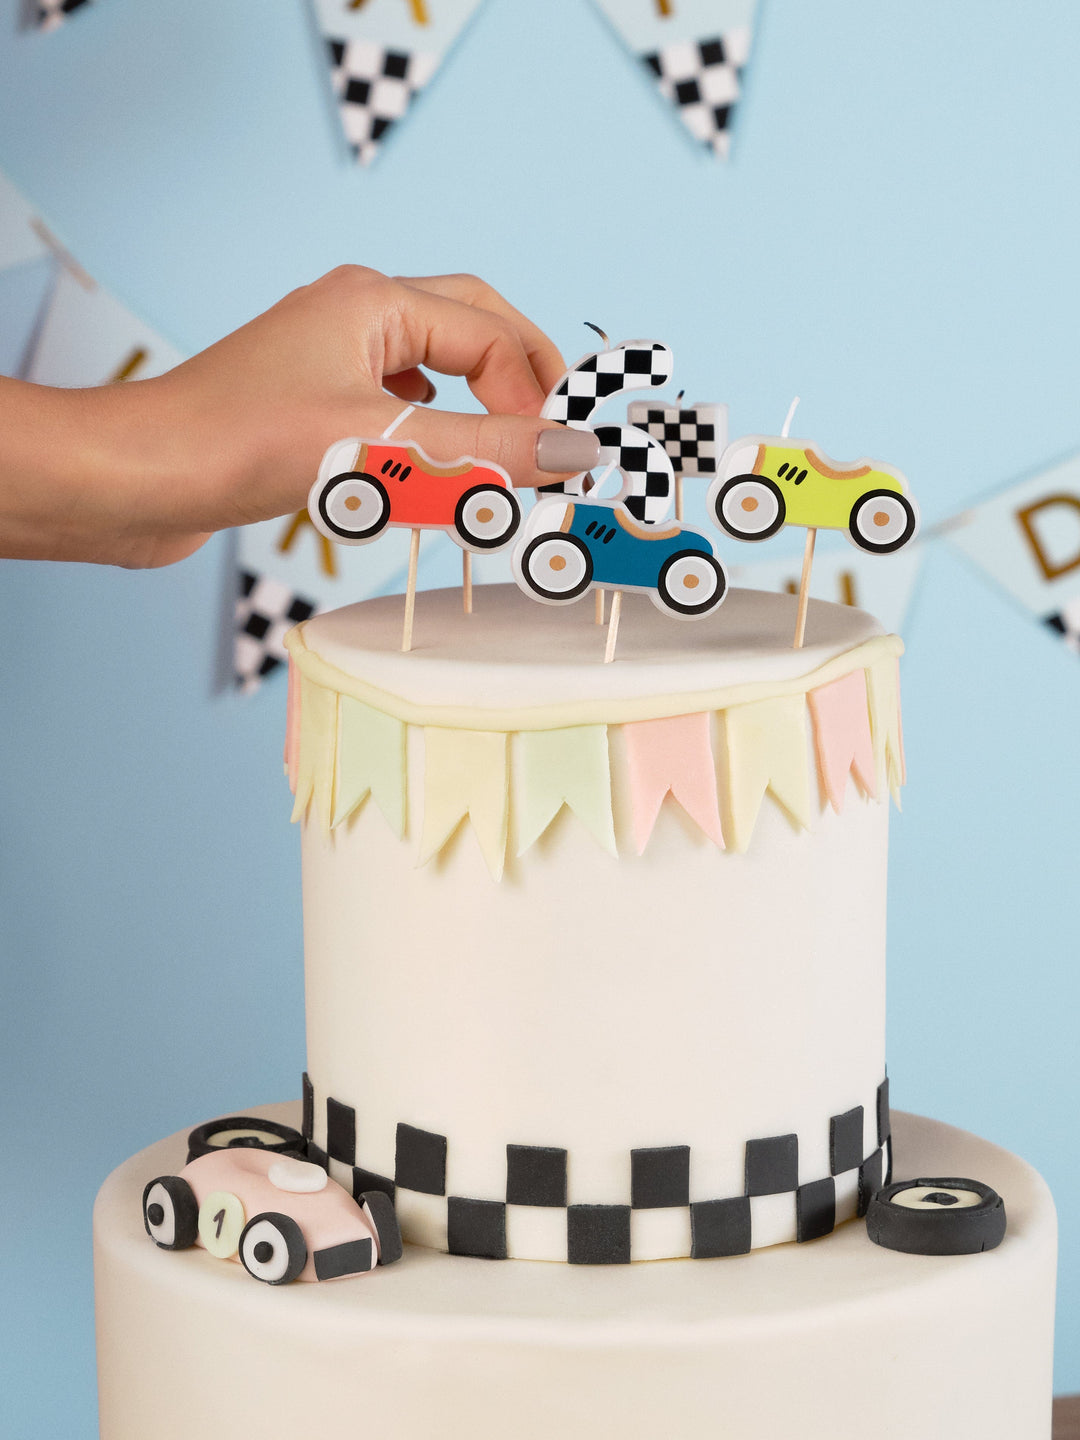 Racing Car Birthday Candles (5 Pack) - Race Car Theme Party Supplies Birthday Candles Racing Car Birthday Candles (5 Pack)